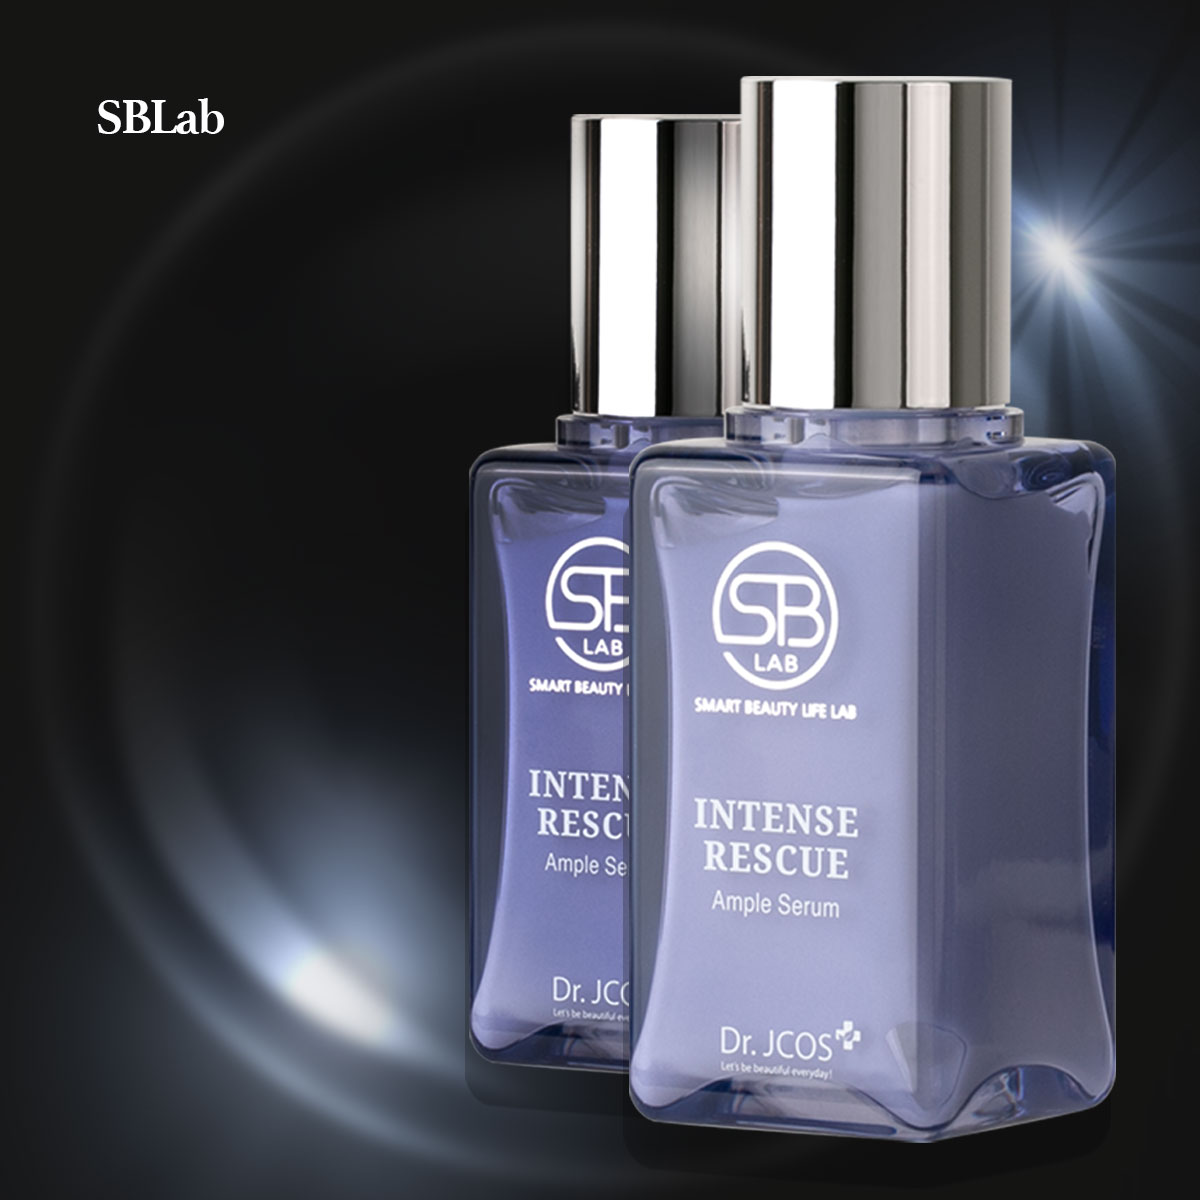 [Axelating Essence for Strengthening Skin Barriers] SB Lab Intensities Rescue Seraberia Ampoule Serum